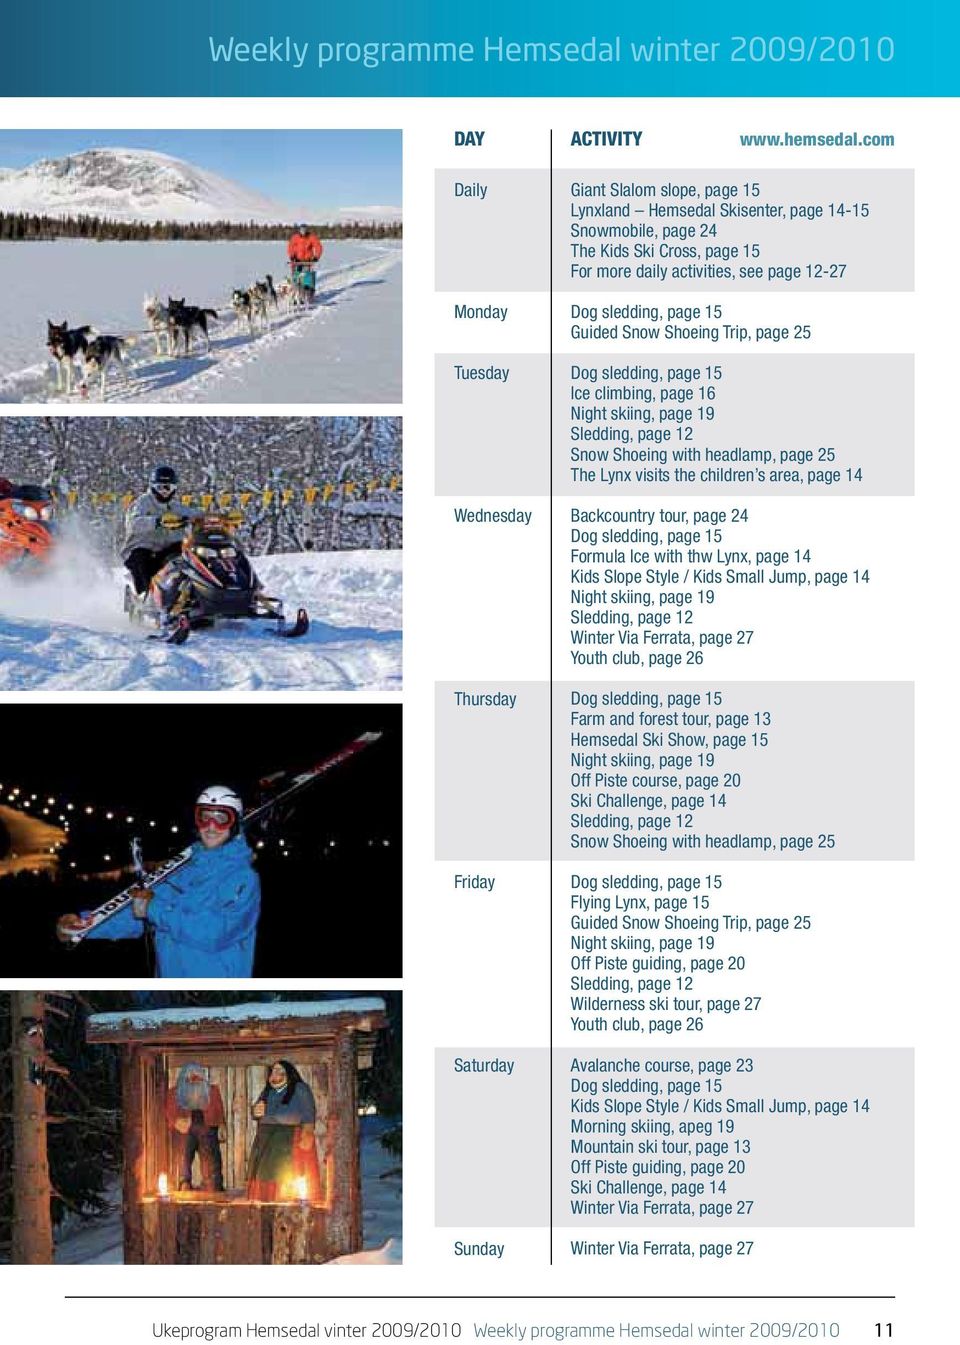 activities, see page 12-27 Dog sledding, page 15 Guided Snow Shoeing Trip, page 25 Dog sledding, page 15 Ice climbing, page 16 Night skiing, page 19 Sledding, page 12 Snow Shoeing with headlamp, page